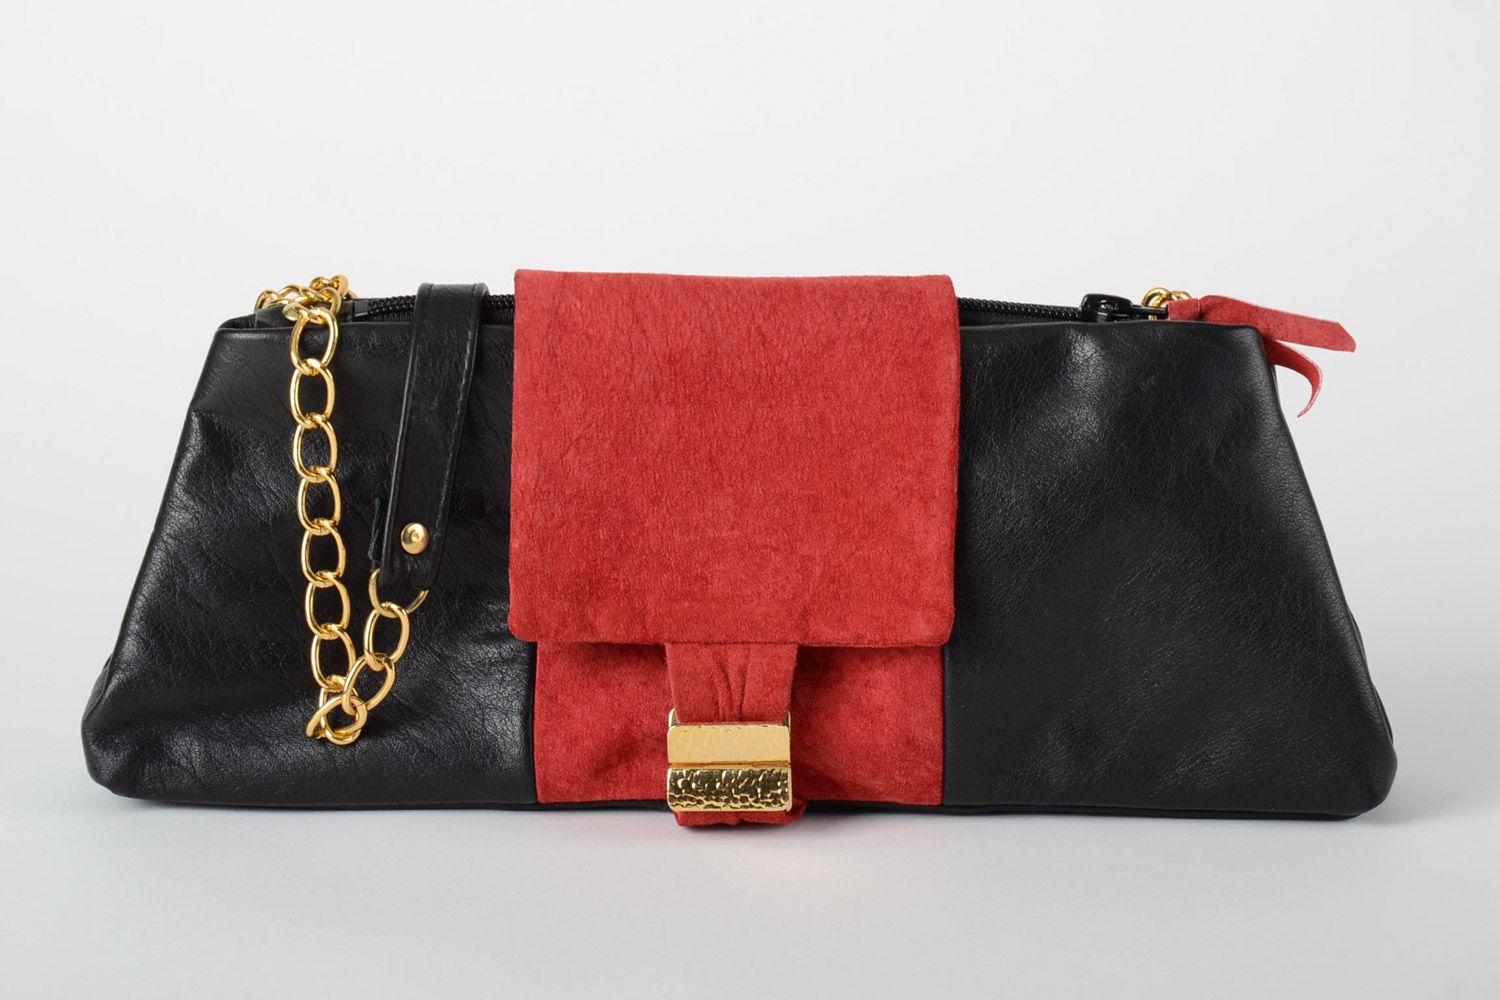 Handmade women's clutch bag sewn of black genuine leather with red inserts on chain photo 2